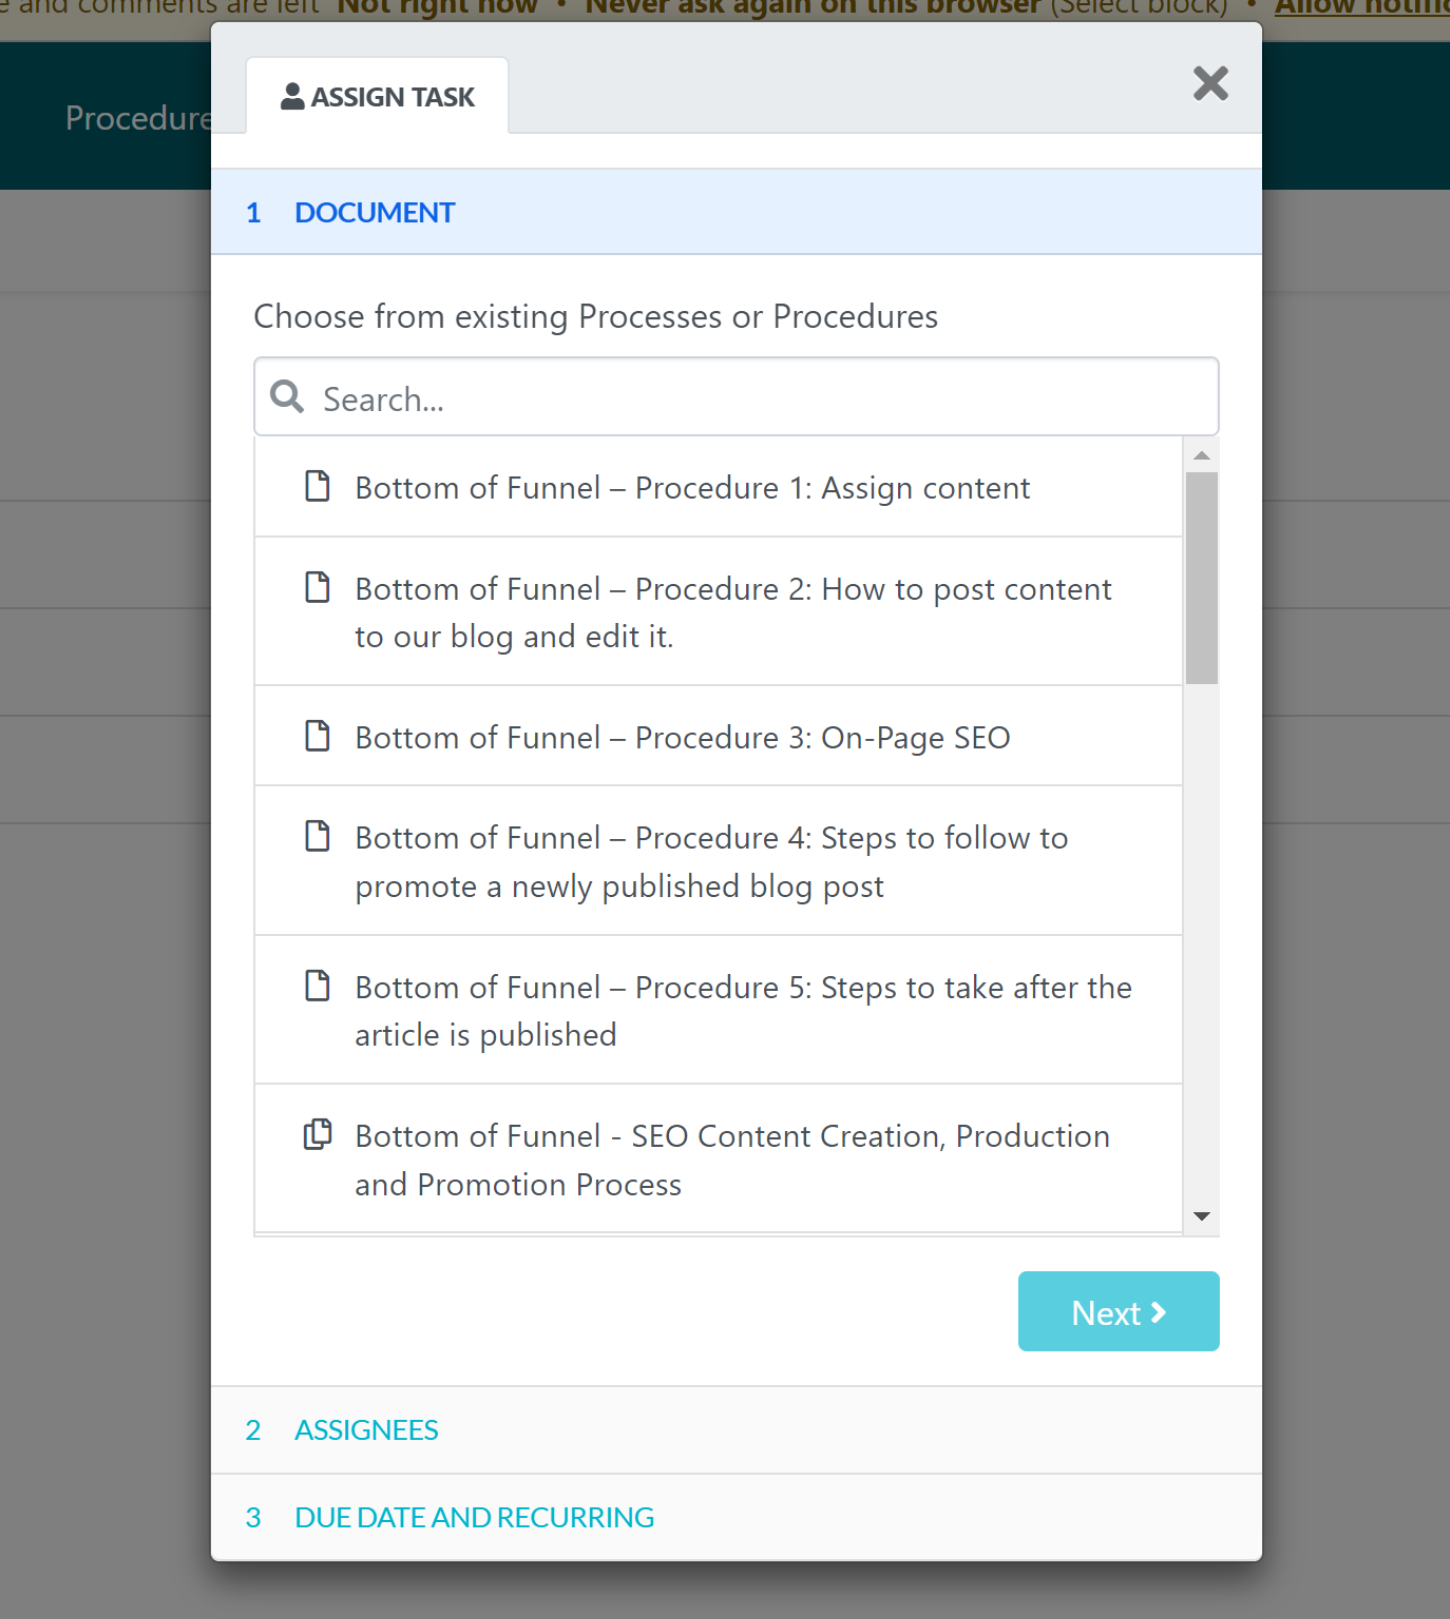 A menu with a list of existing procedures and processes will pop up